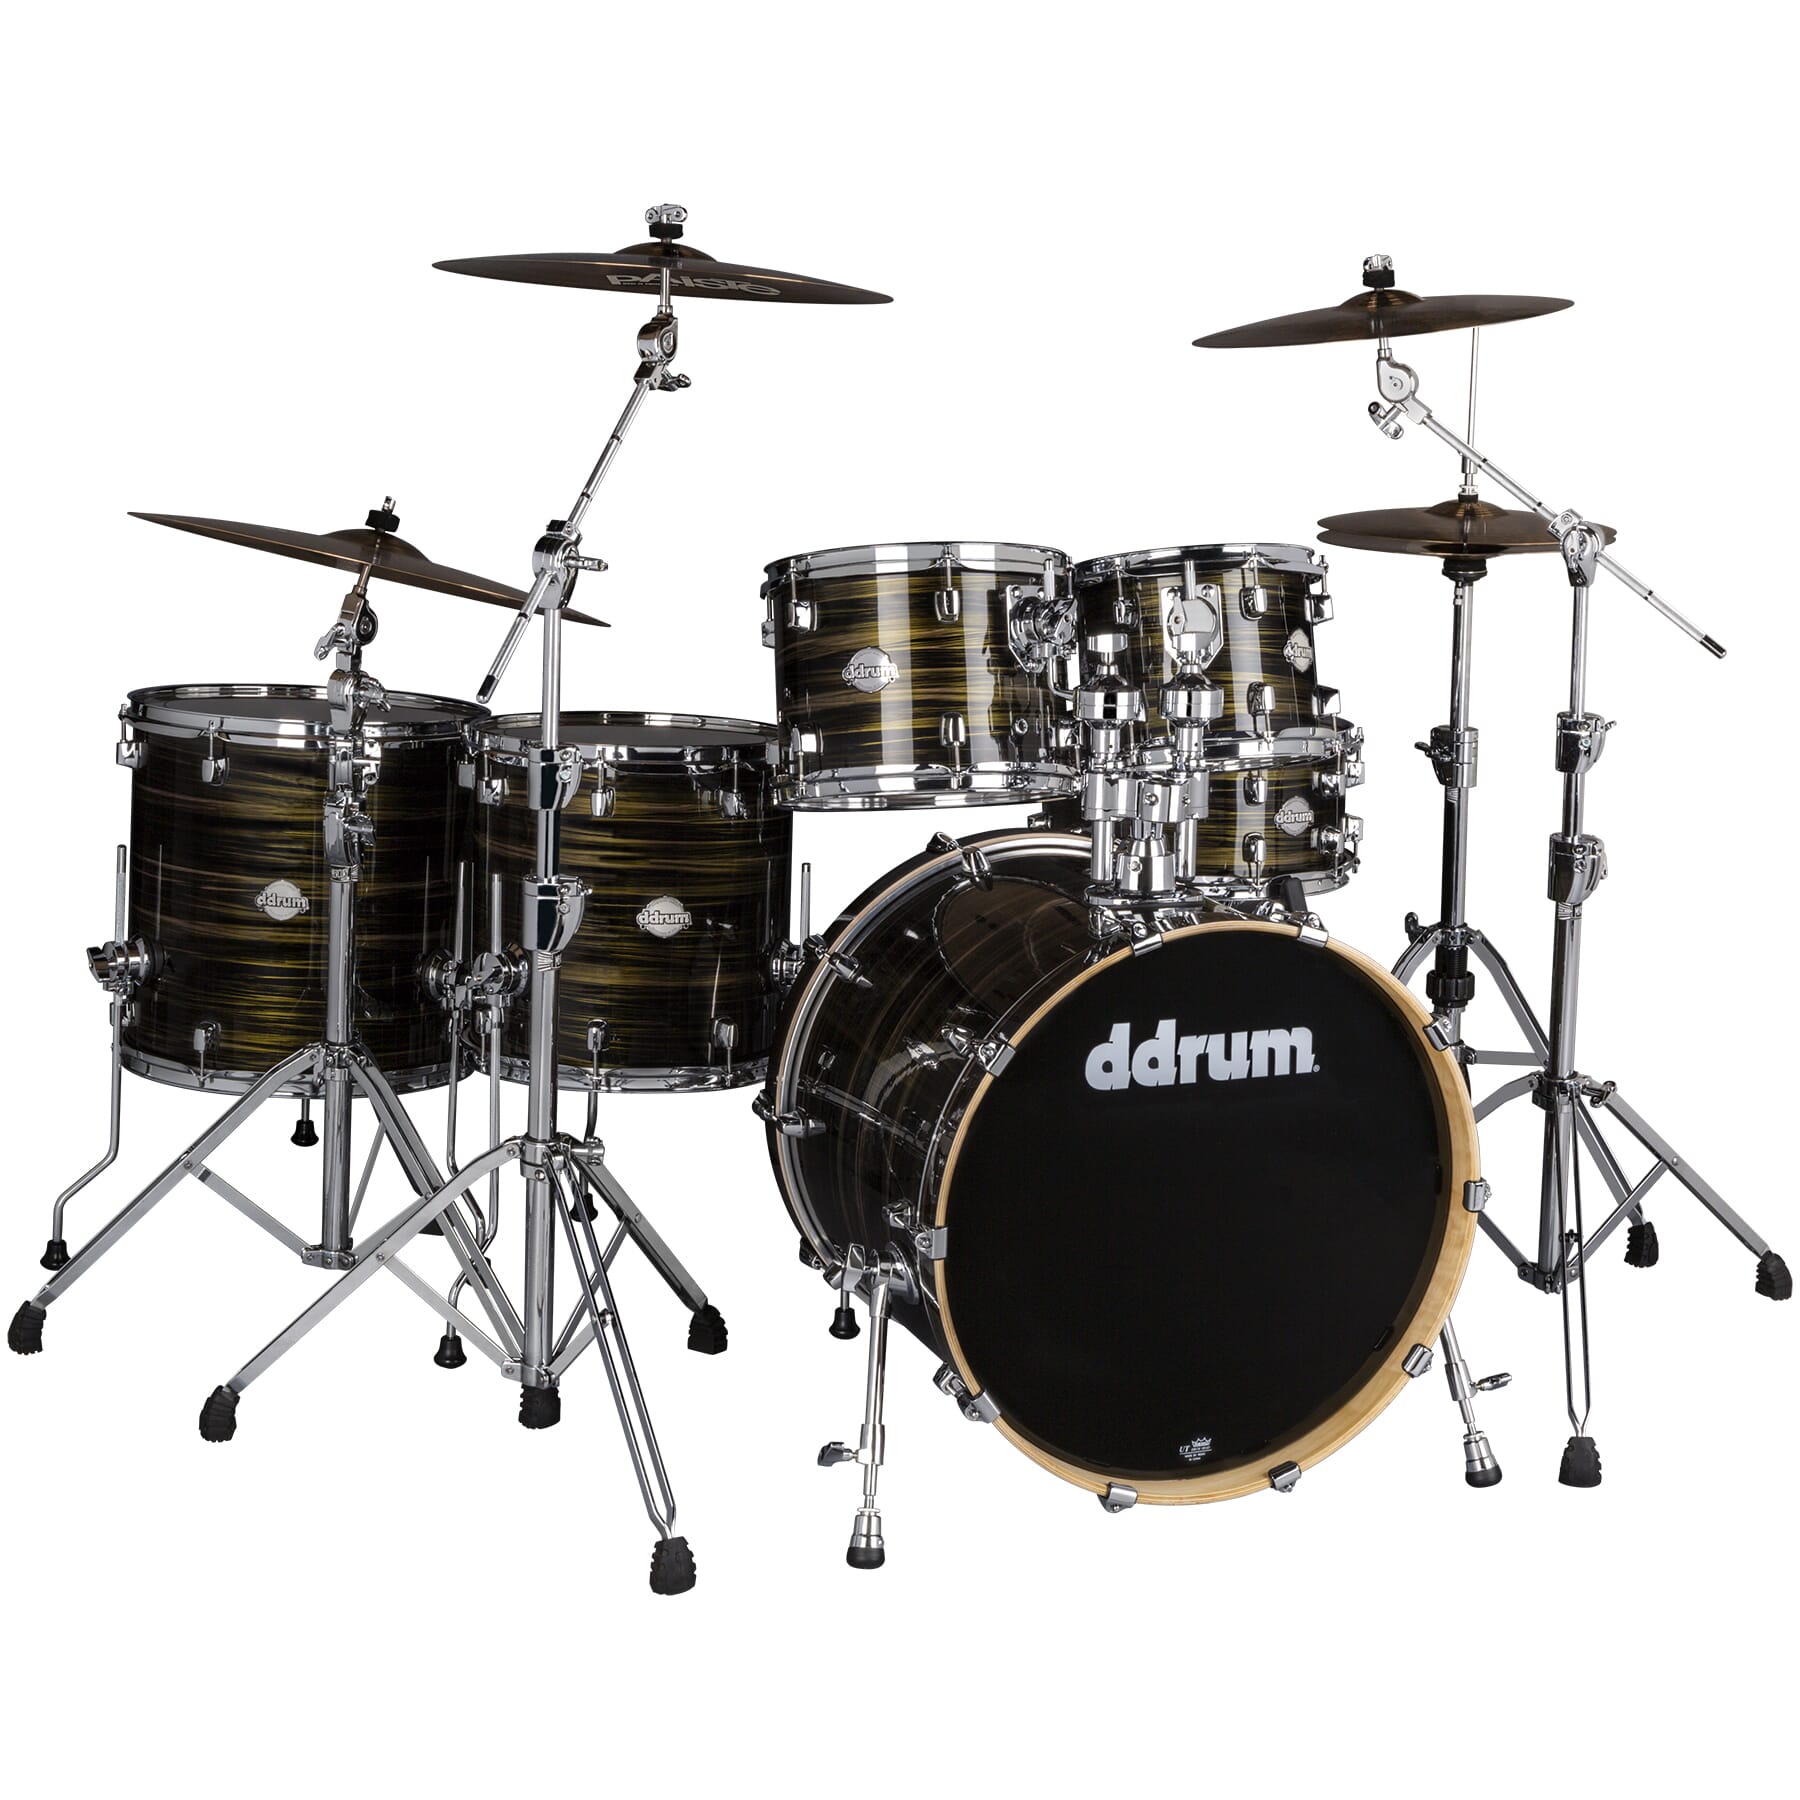 Go to ddrum.com (product subpage)